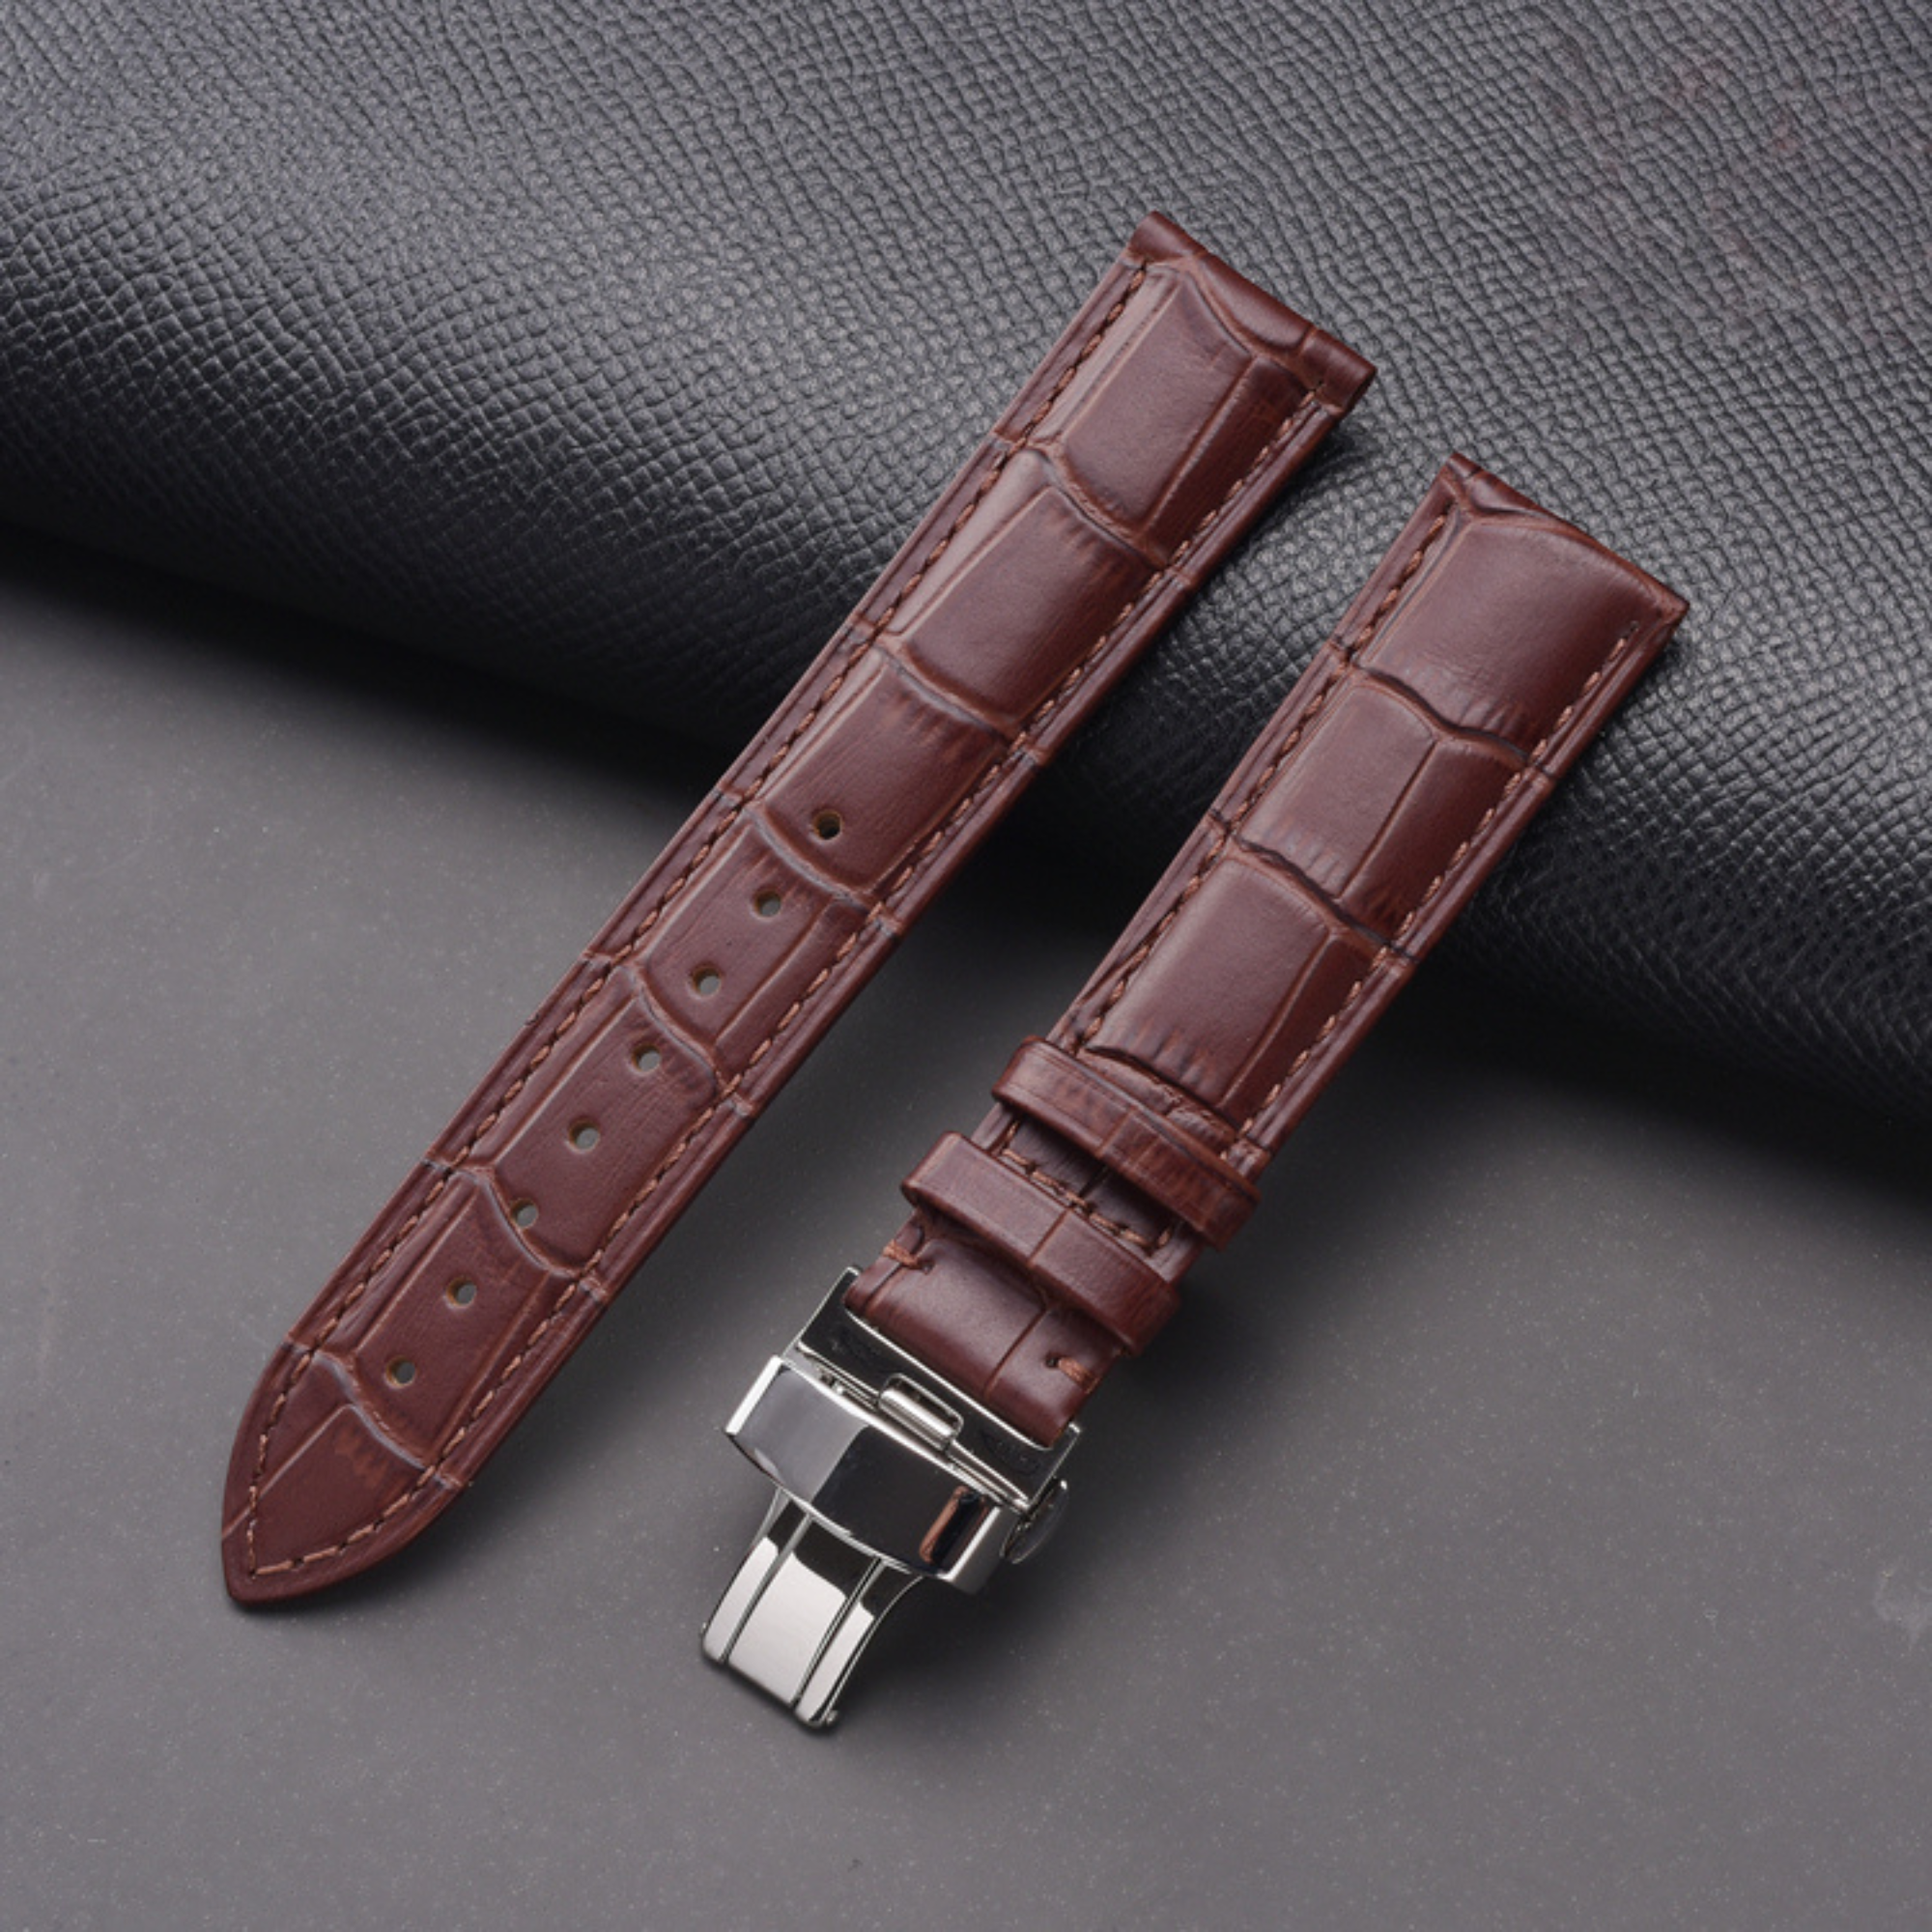 Quality Leather Watchbands Watch Band/Strap with Steel Pin buckle - Brown 20 mm watch leather strap band india online dream watches